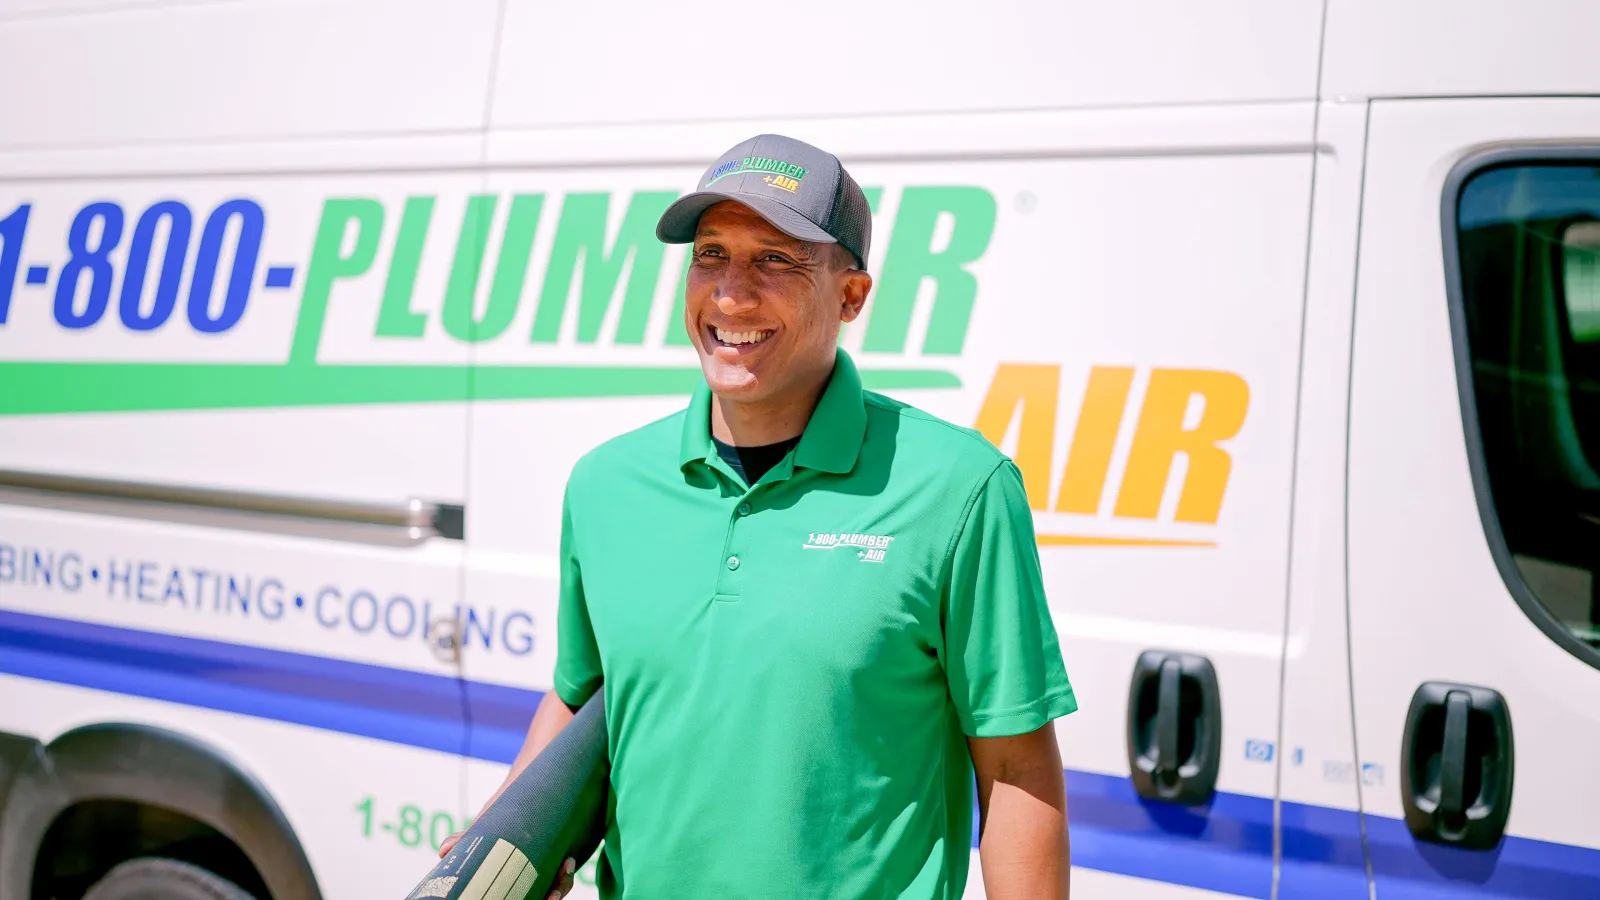 A 1-800-Plumber +Air of Clearwater plumbing technician